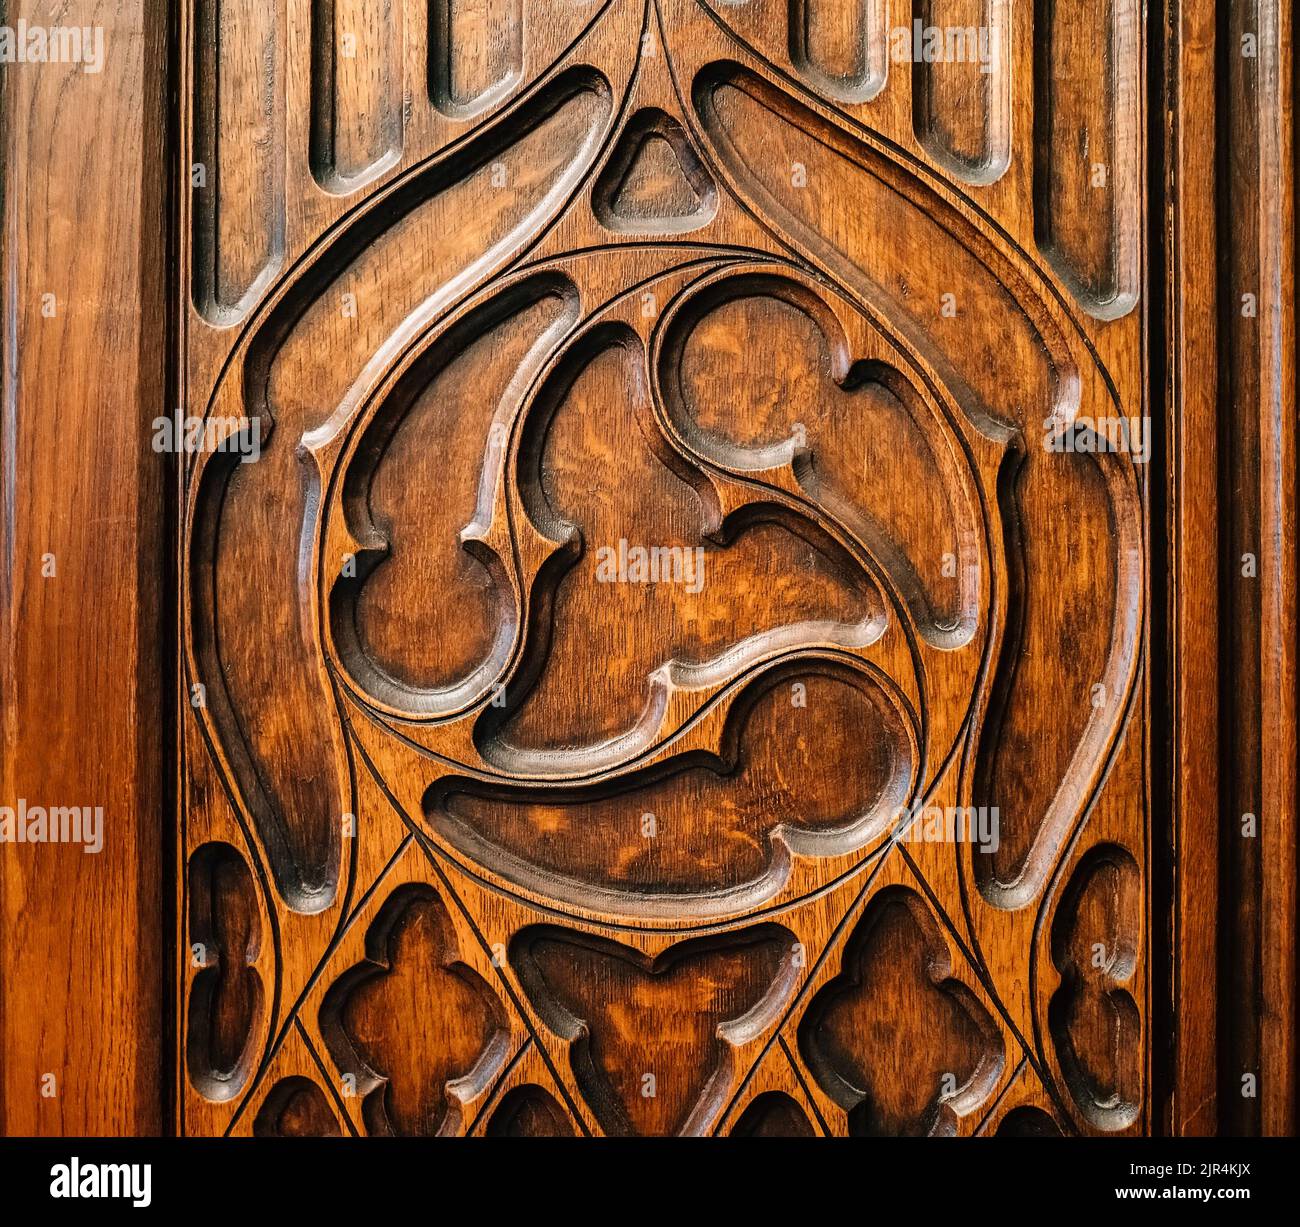 Close-up of vintage 19th century European wooden antique furniture in Victorian style. Stock Photo